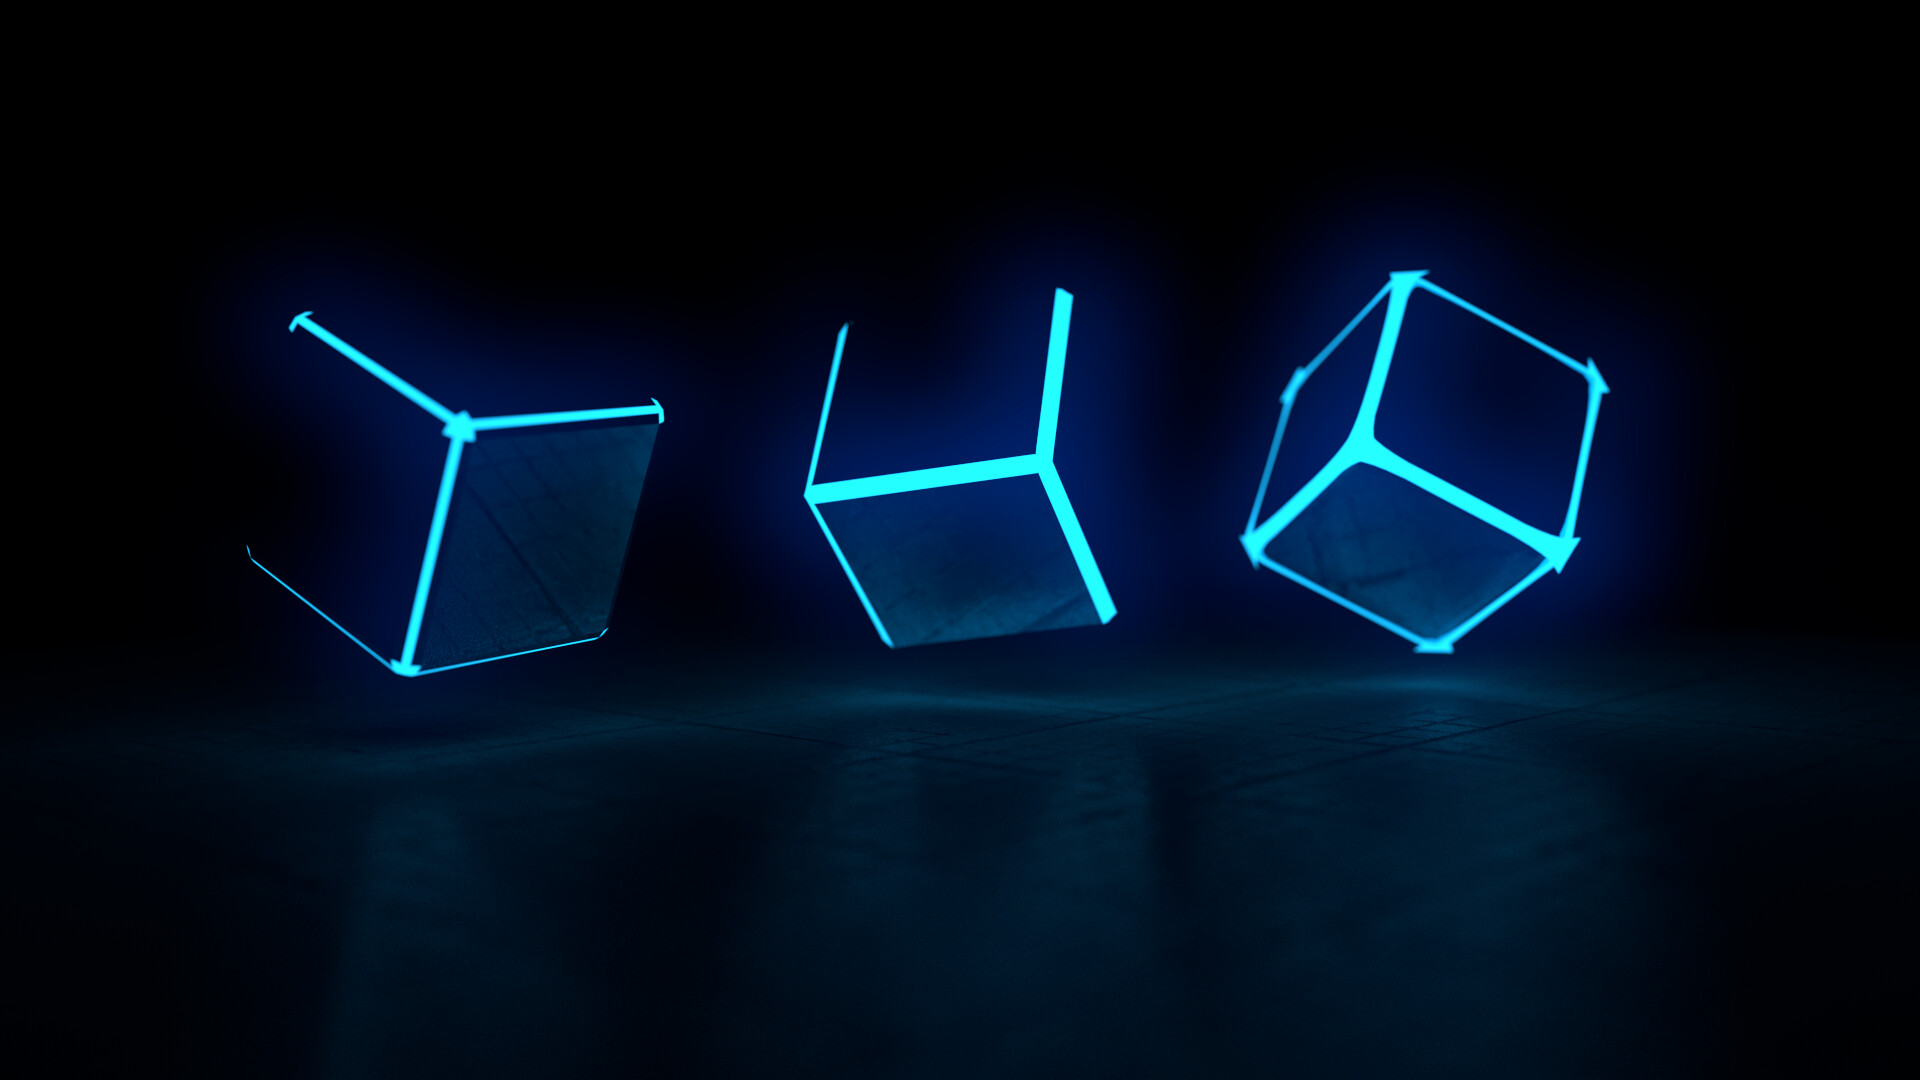 Cubes Wallpapers